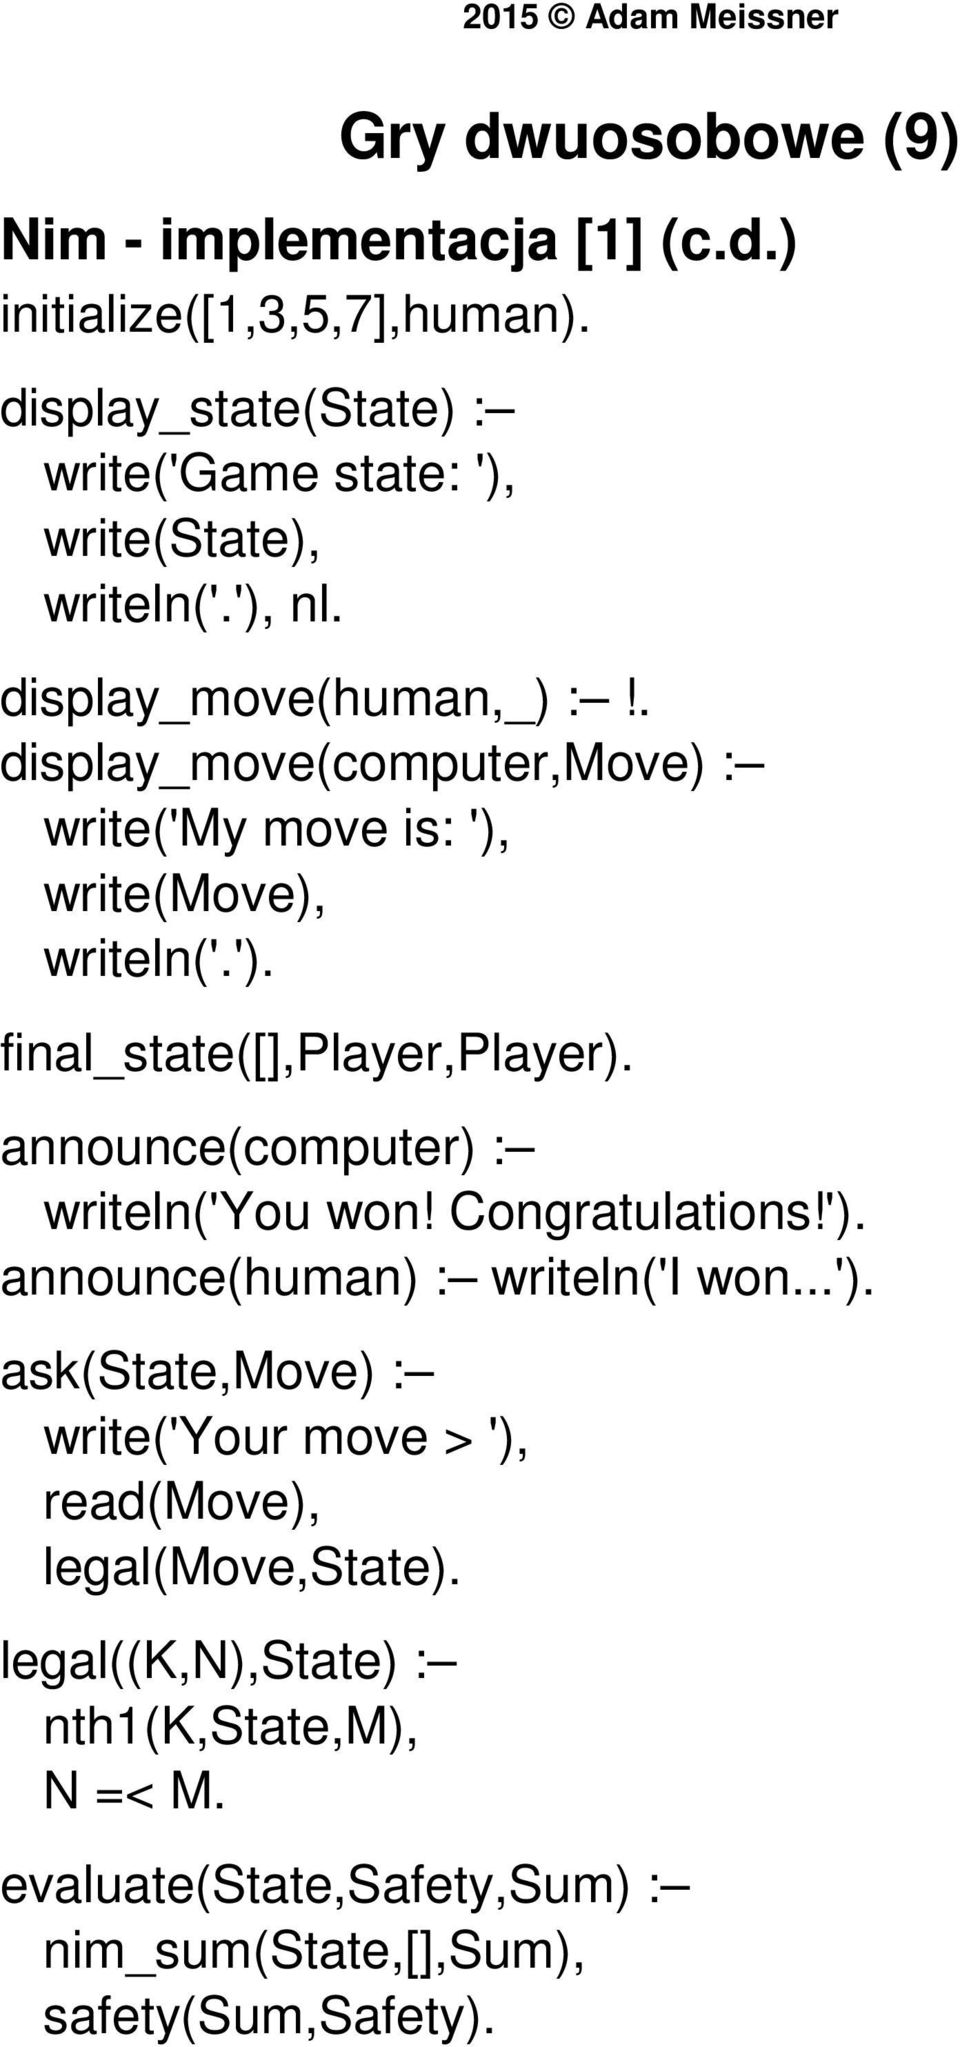 . display_move(computer,move) : write('my move is: '), write(move), writeln('.'). final_state([],player,player).